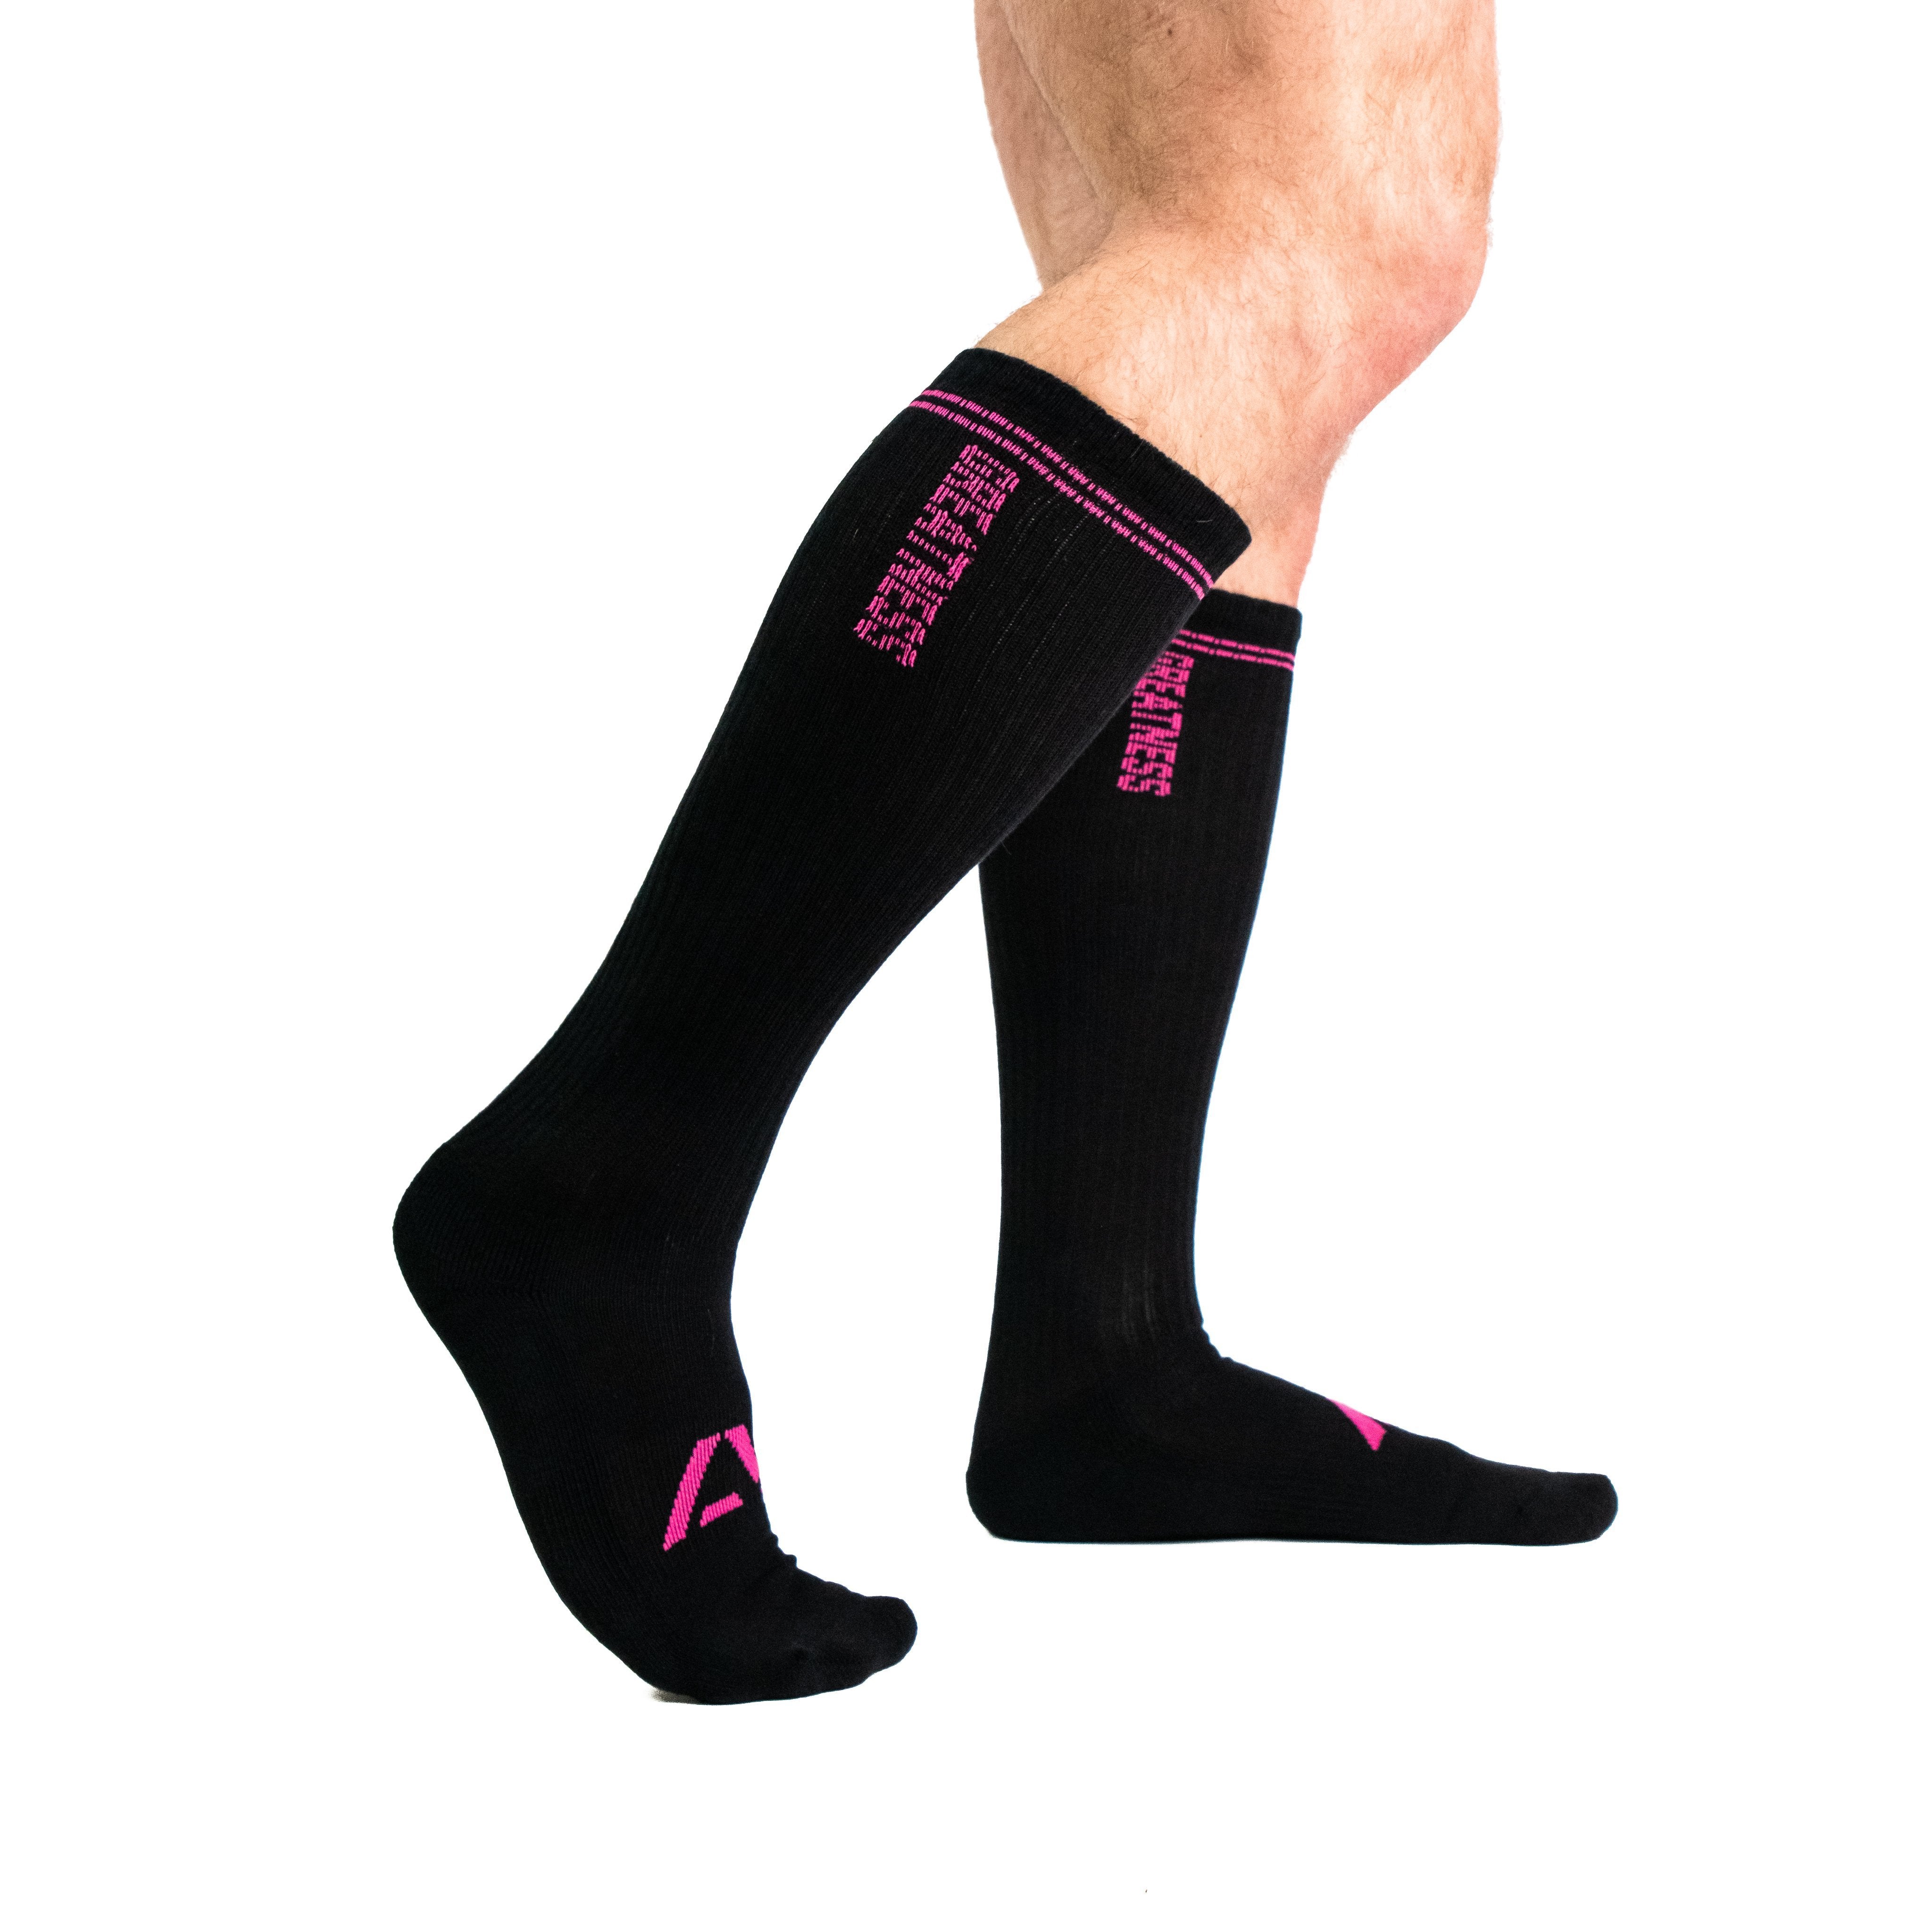 Standout from the crowd in our Pink Deadlift socks and let your energy show on the platform, in your training or while out and about.